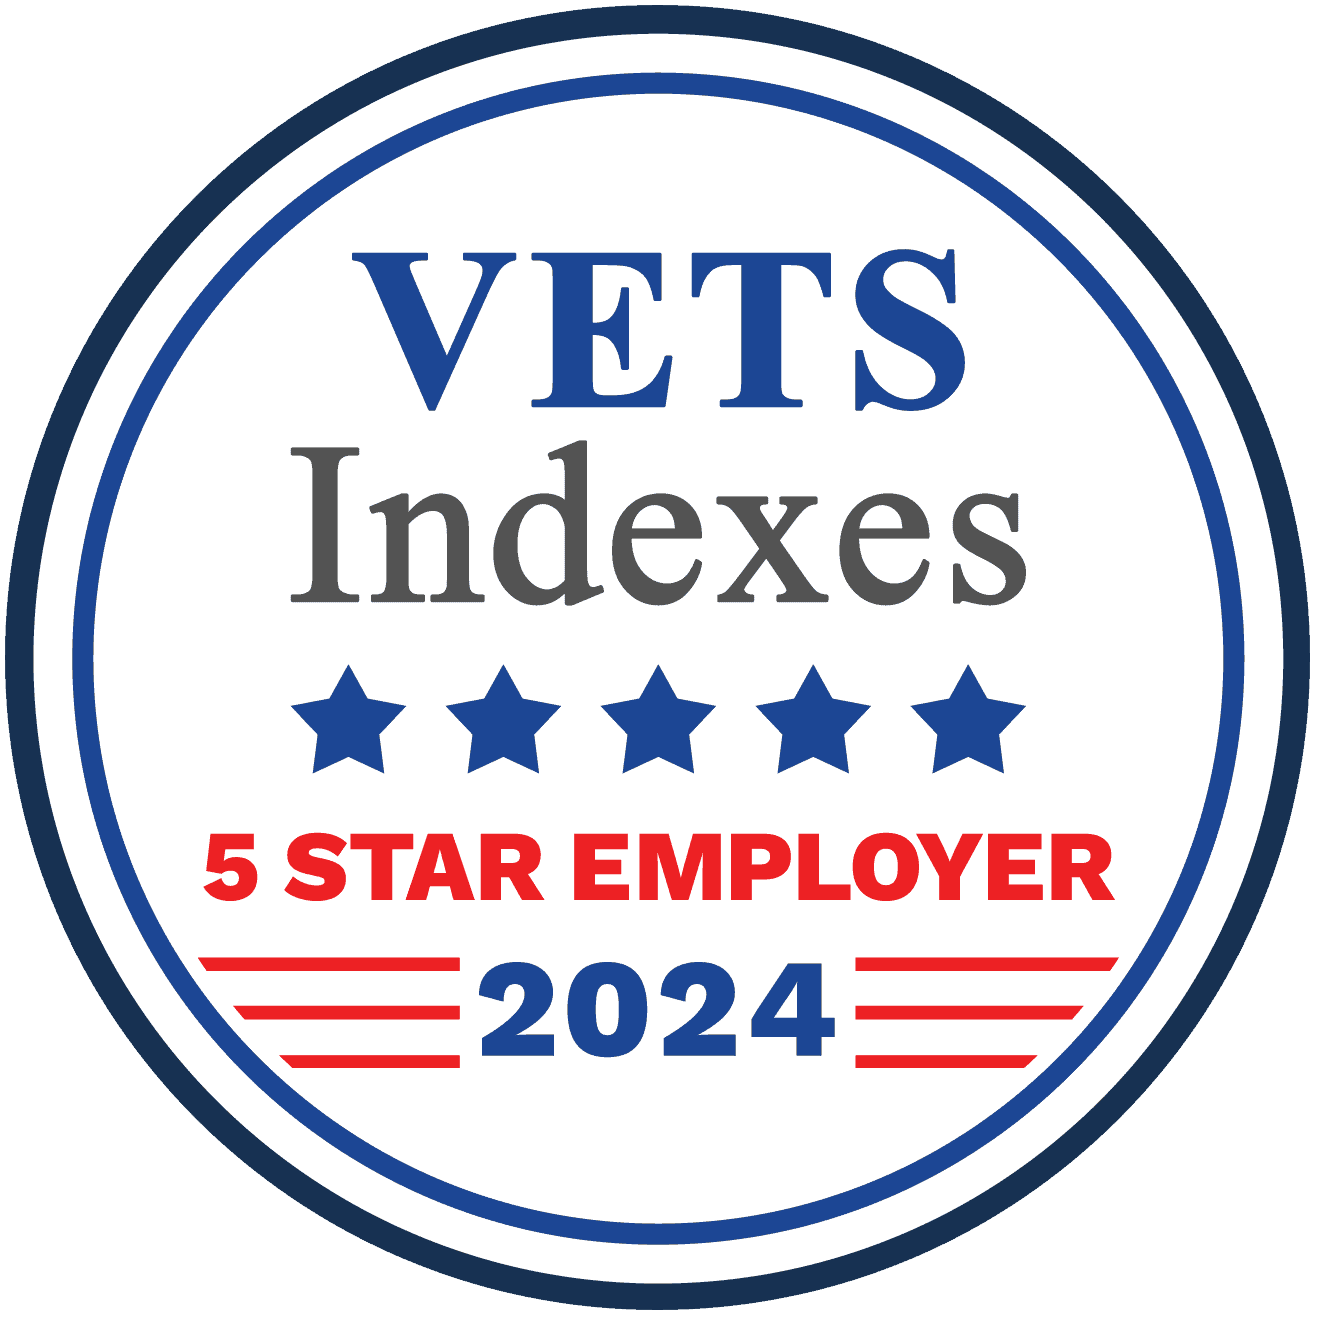 Sabre Selected as VETS Indexes 5 Star Employer